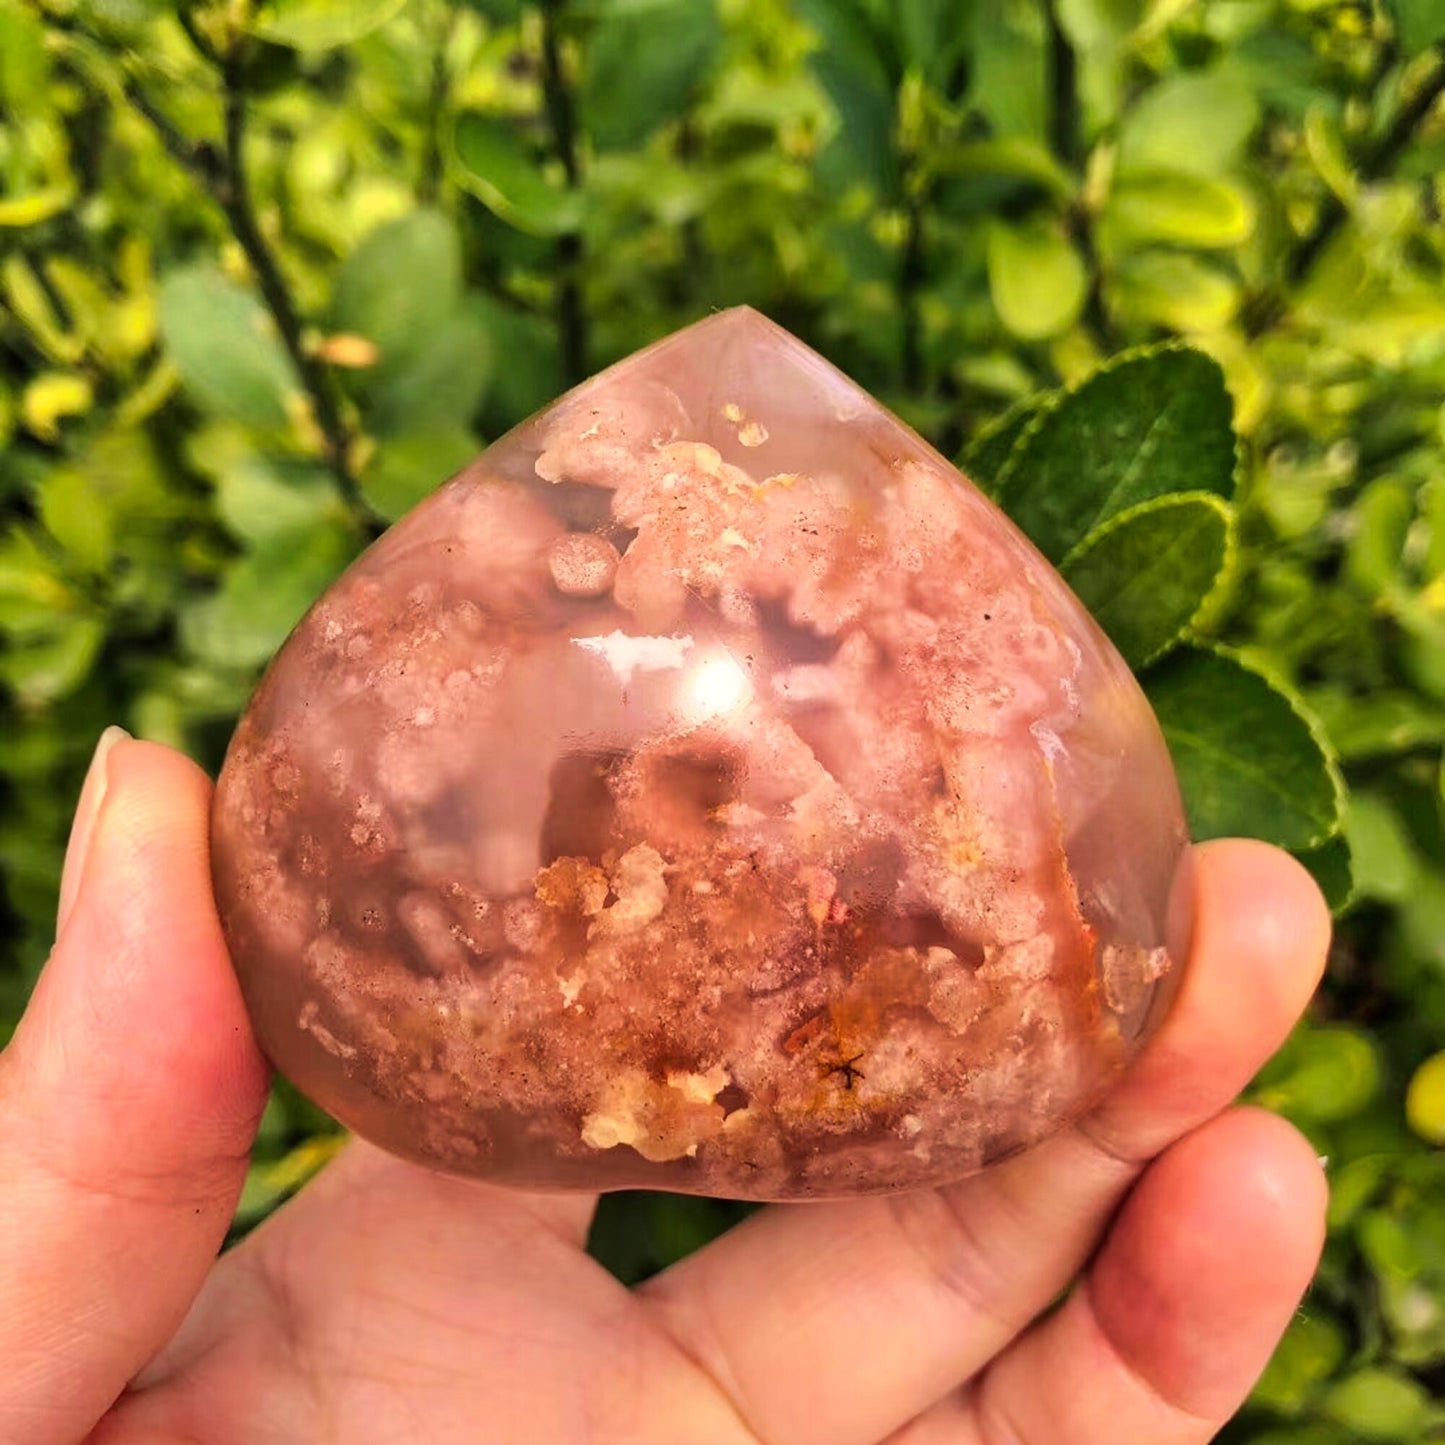 Cherry Blossom Agate Heart - 220-250g Natural Stone for Spiritual Healing and Chakra, Quartz Crystal - Ideal Gift (1pcs)